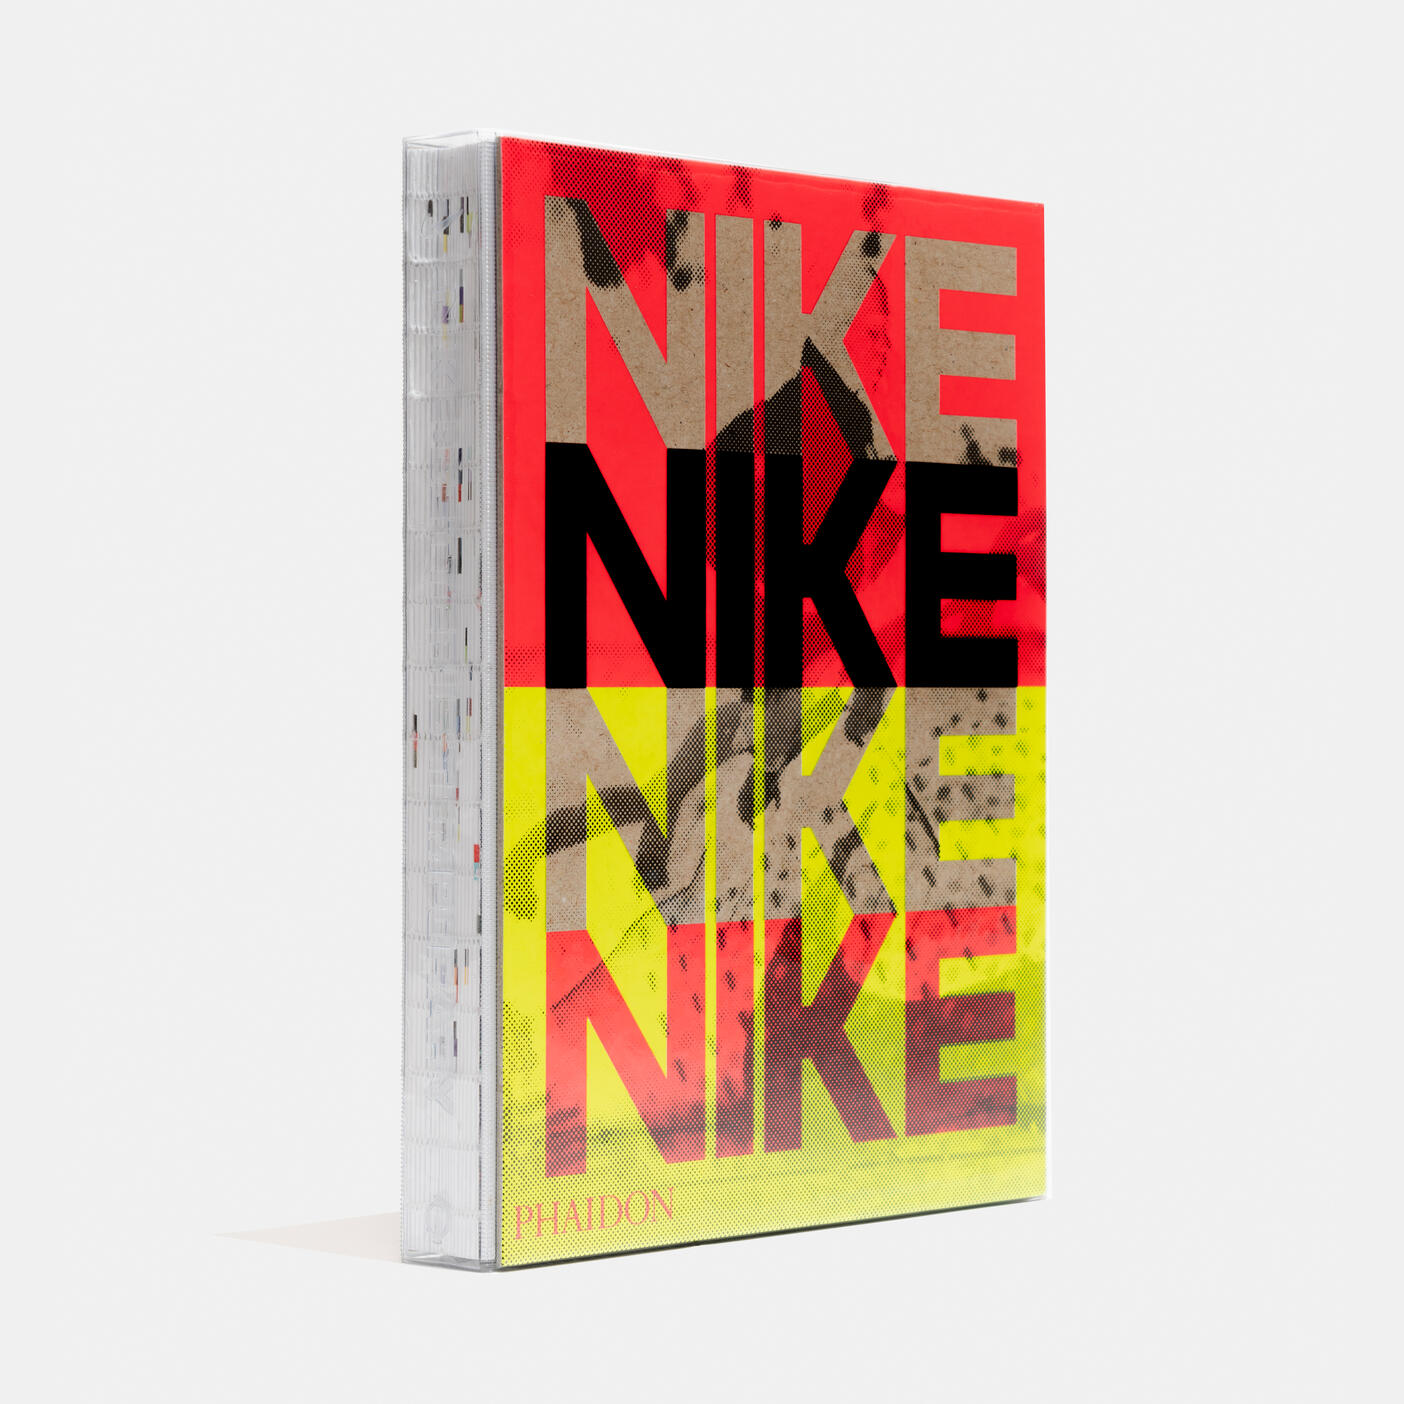 PHAIDON Nike: Better is Temporary Hardcover Book by Sam Grawe